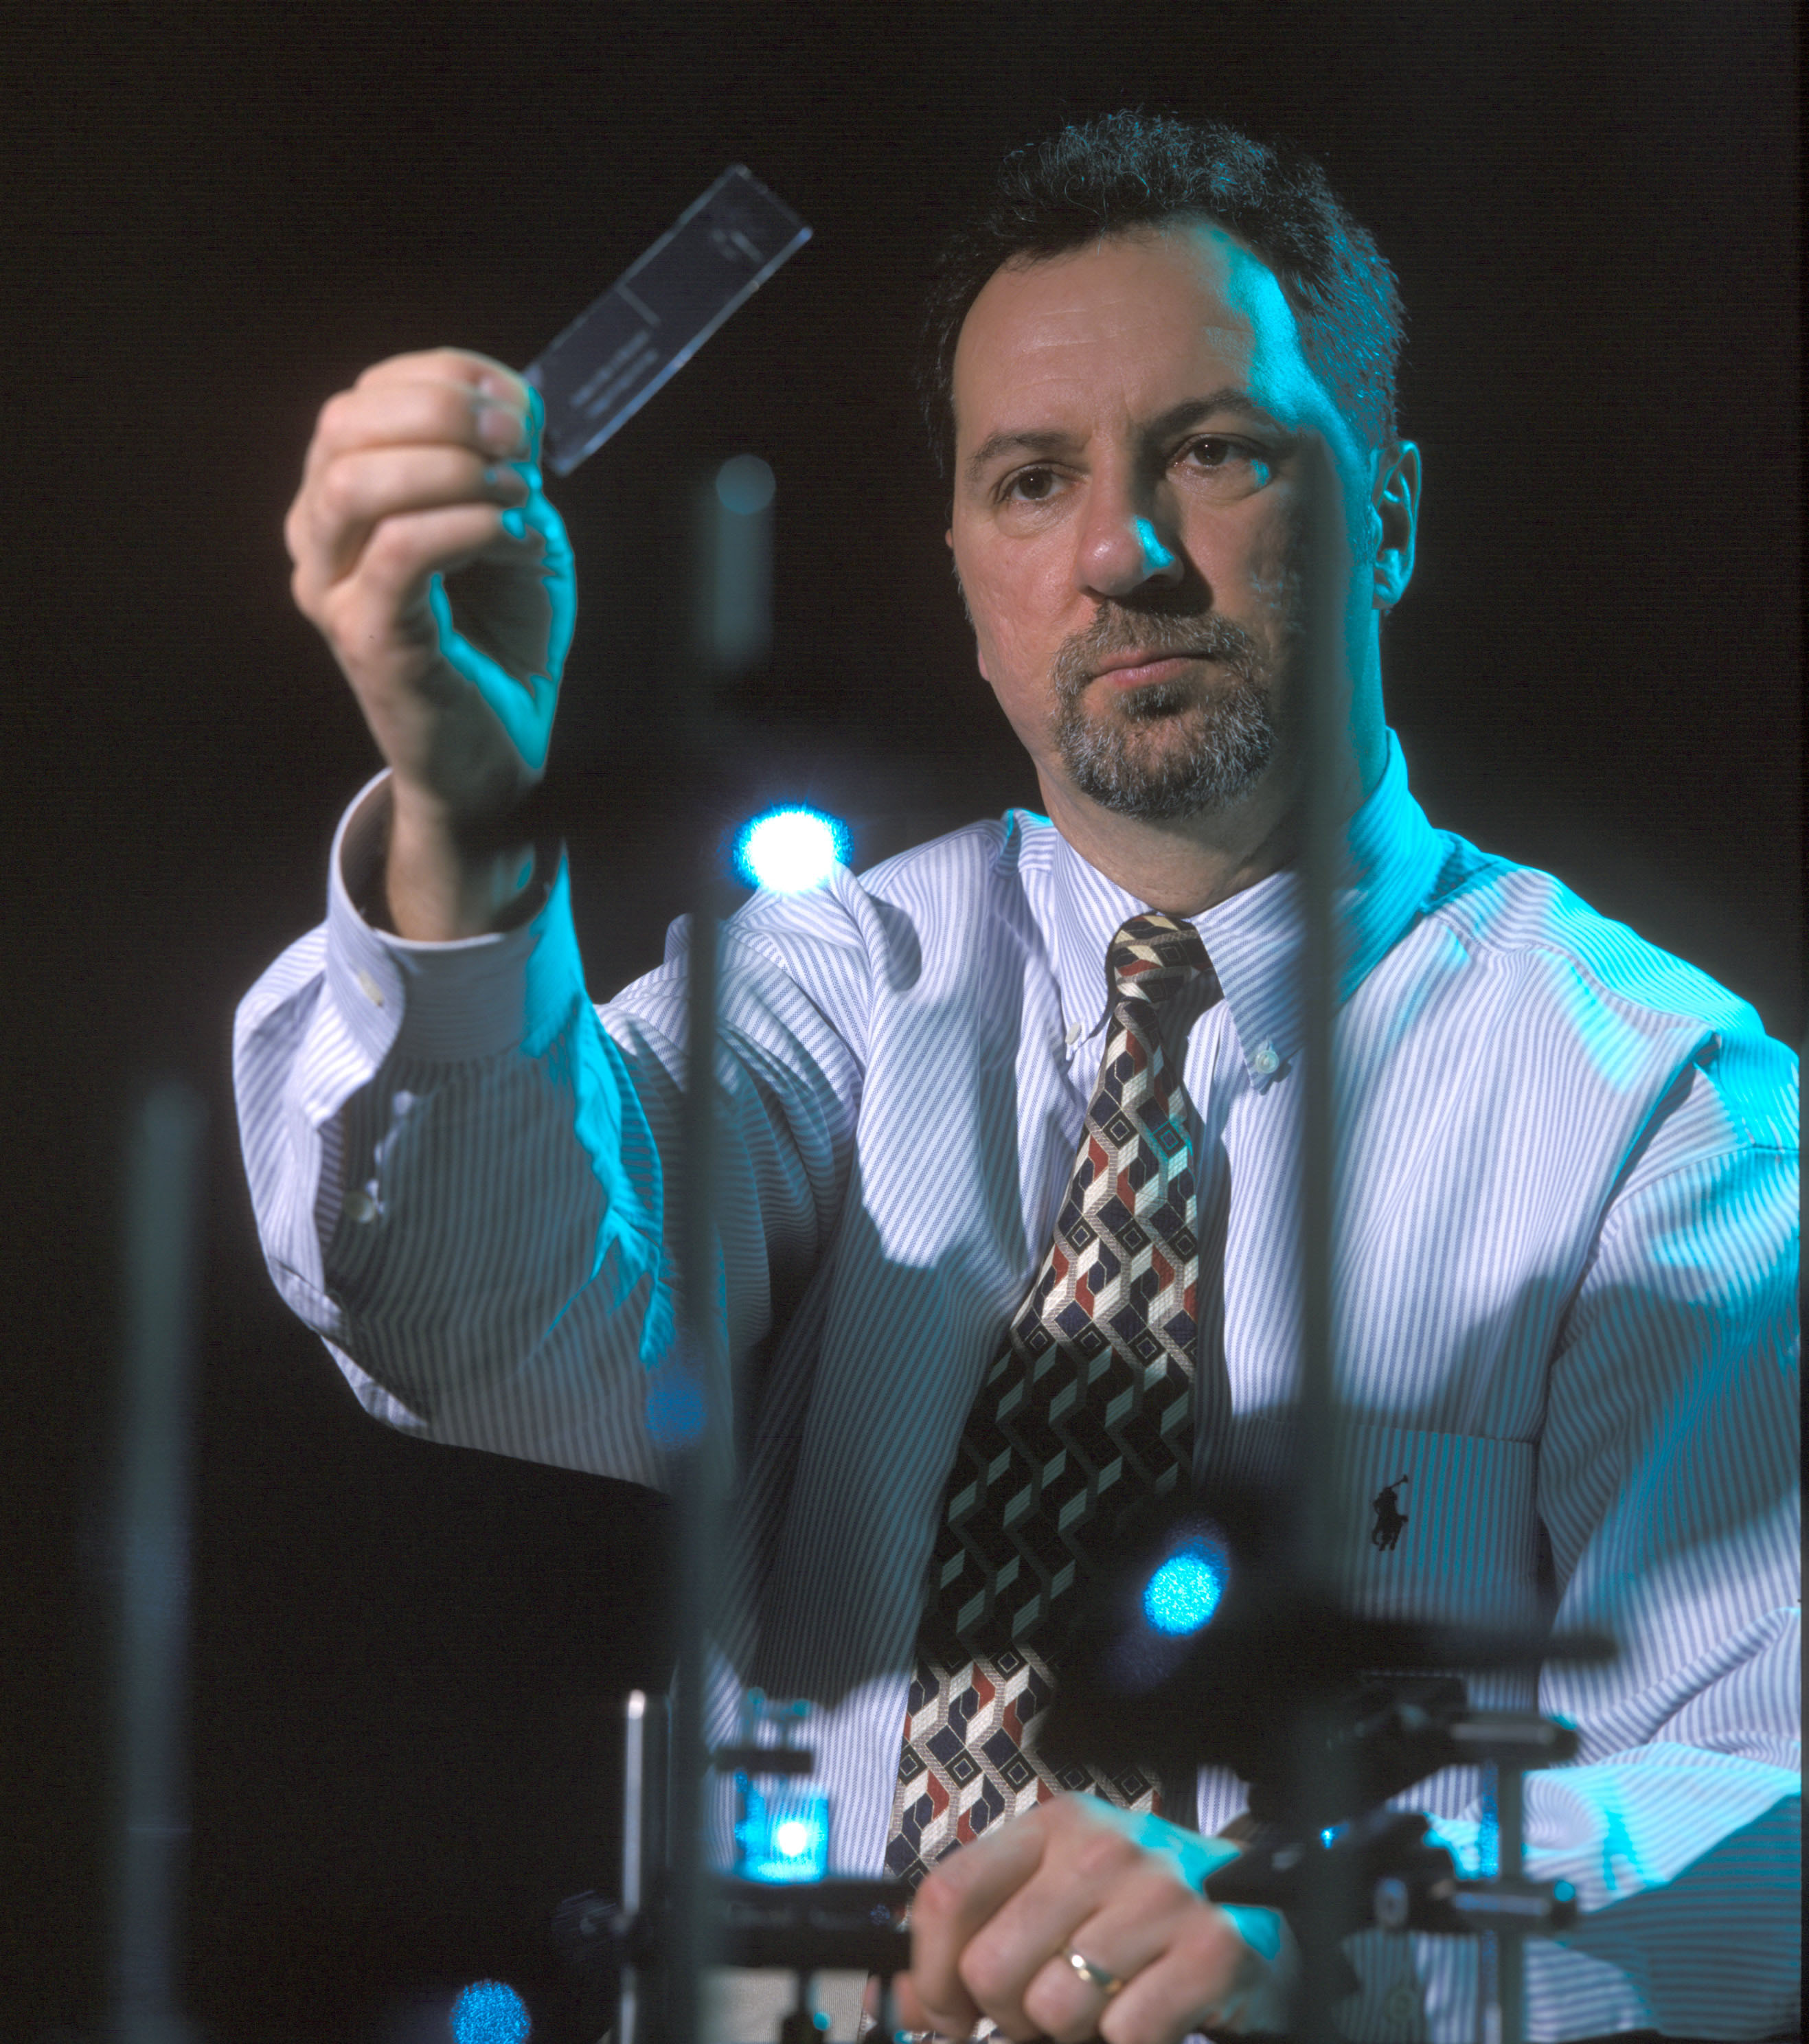 James P. Landers holds up a microscope slide and looks at it